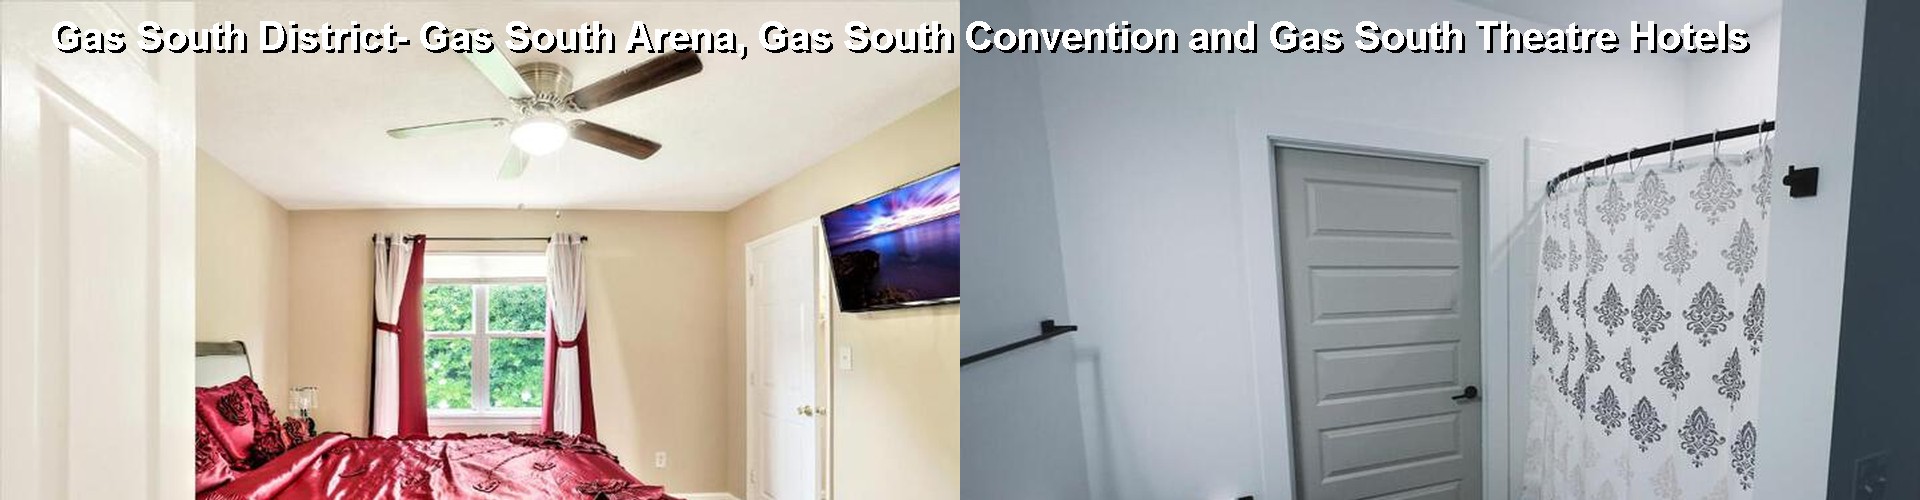 5 Best Hotels near Gas South District- Gas South Arena, Gas South Convention and Gas South Theatre